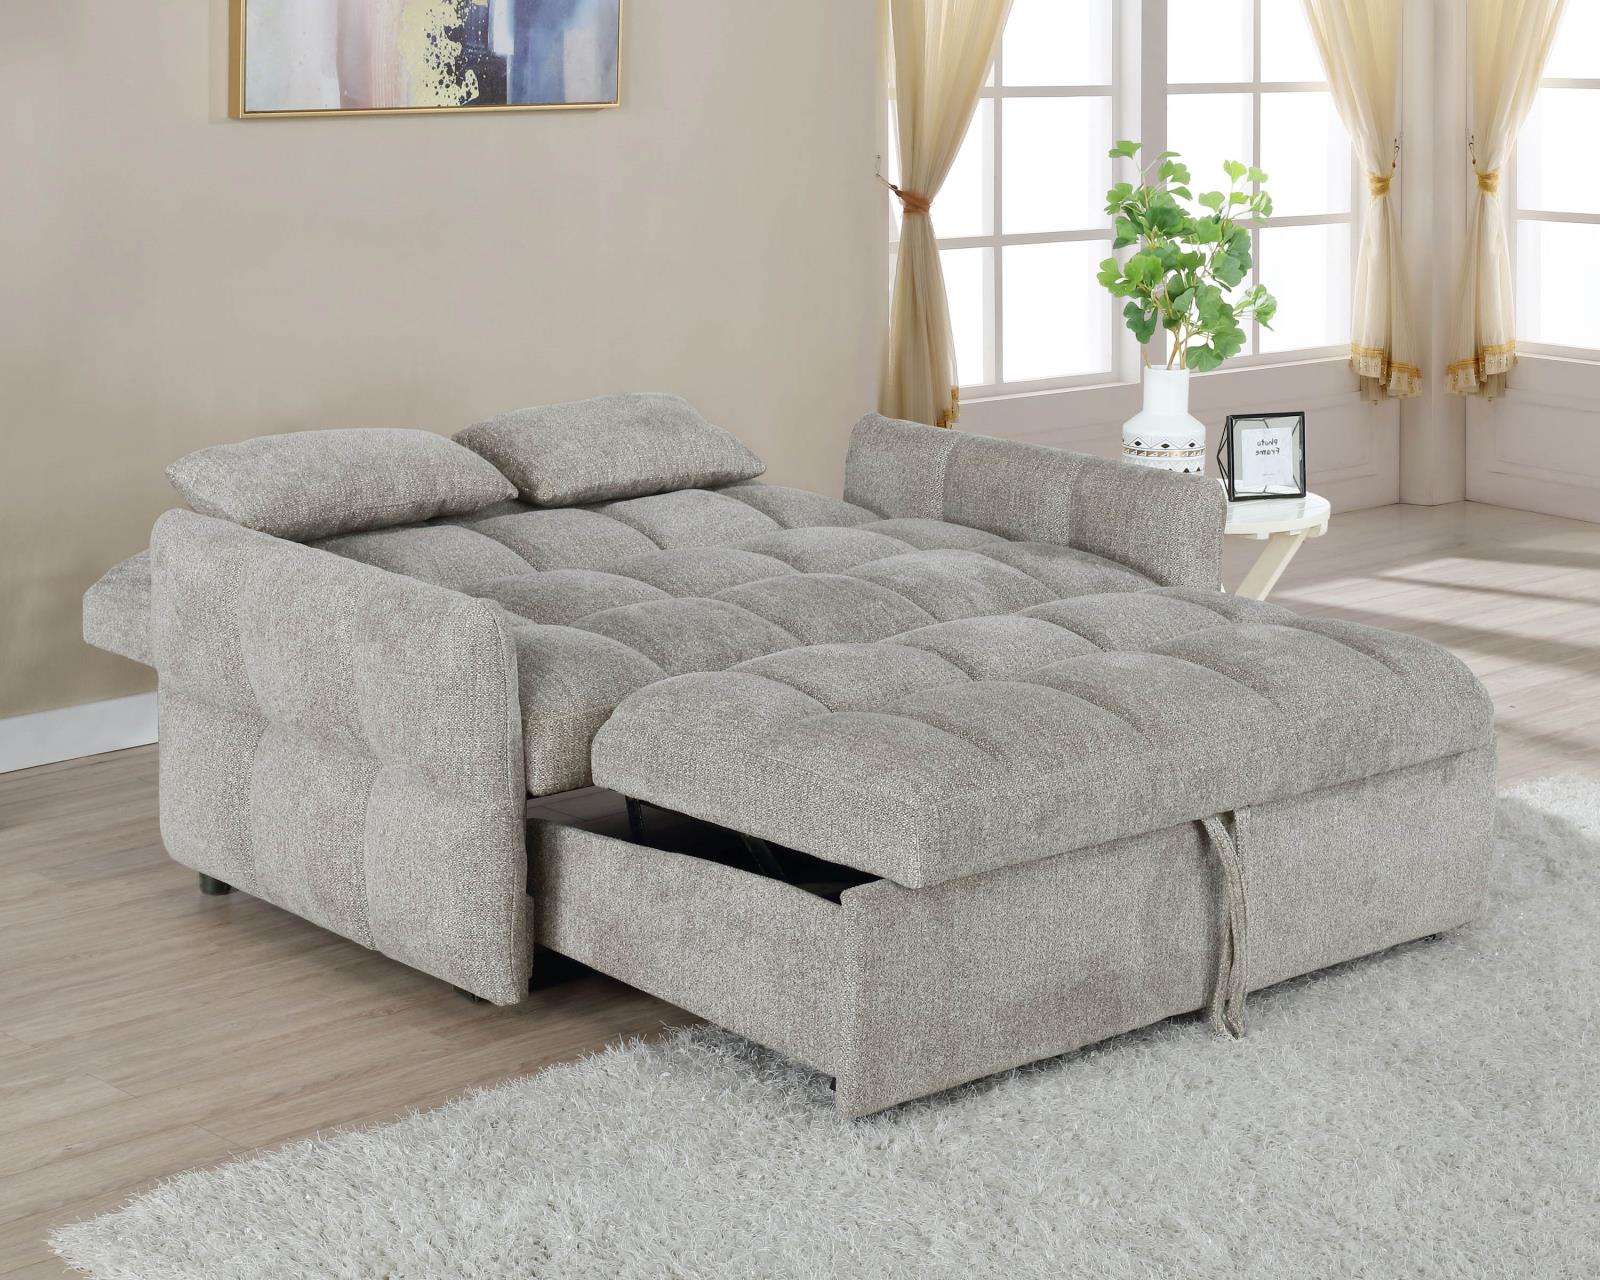 Cotswold Tufted Cushion Sleeper Sofa Bed Beige - What A Room